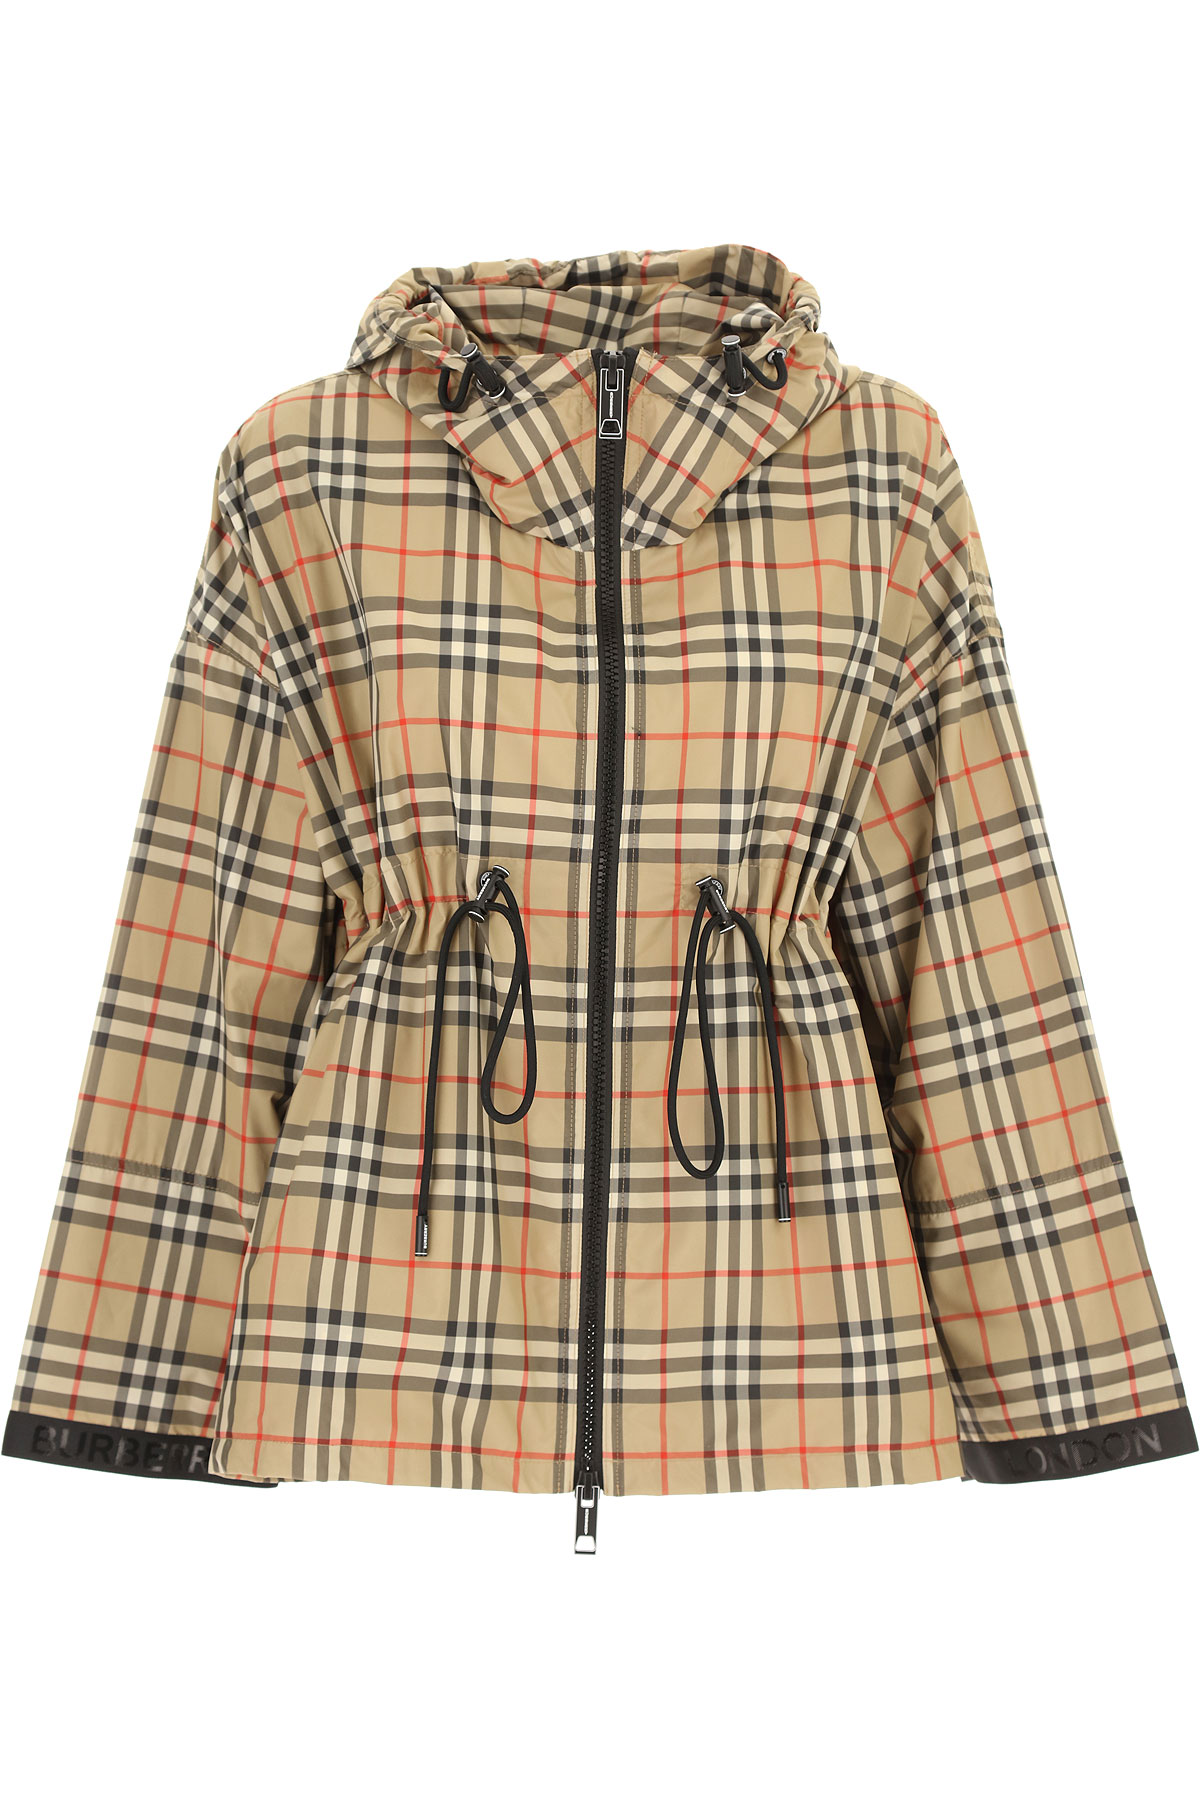 Womens Clothing Burberry, Style code: 8032210-bactonchk-117862